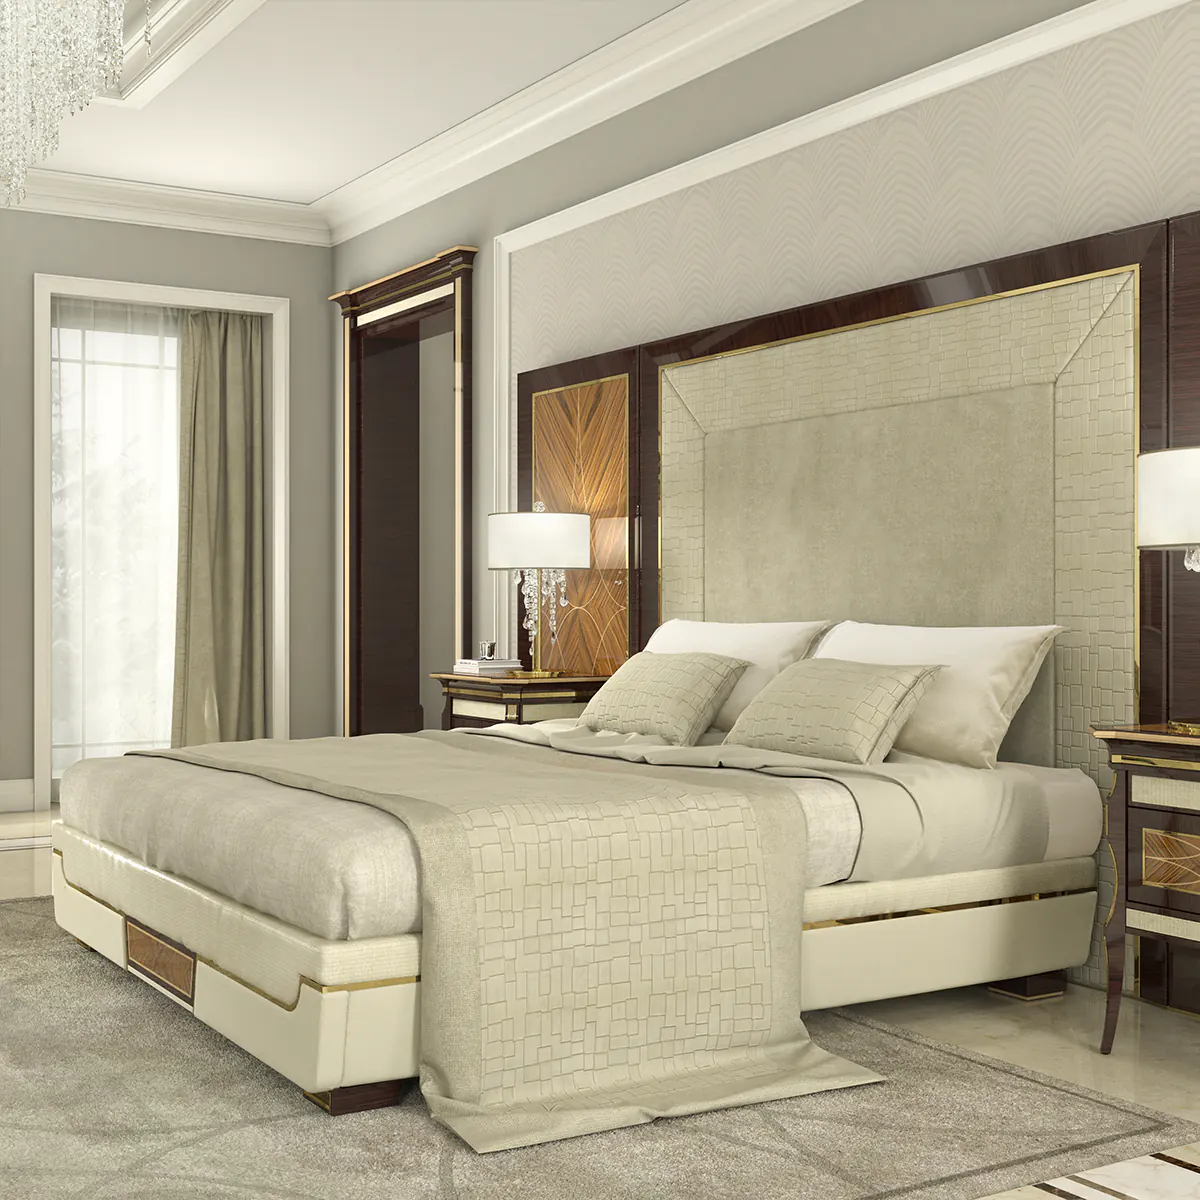 Monte Carlo LUX bed